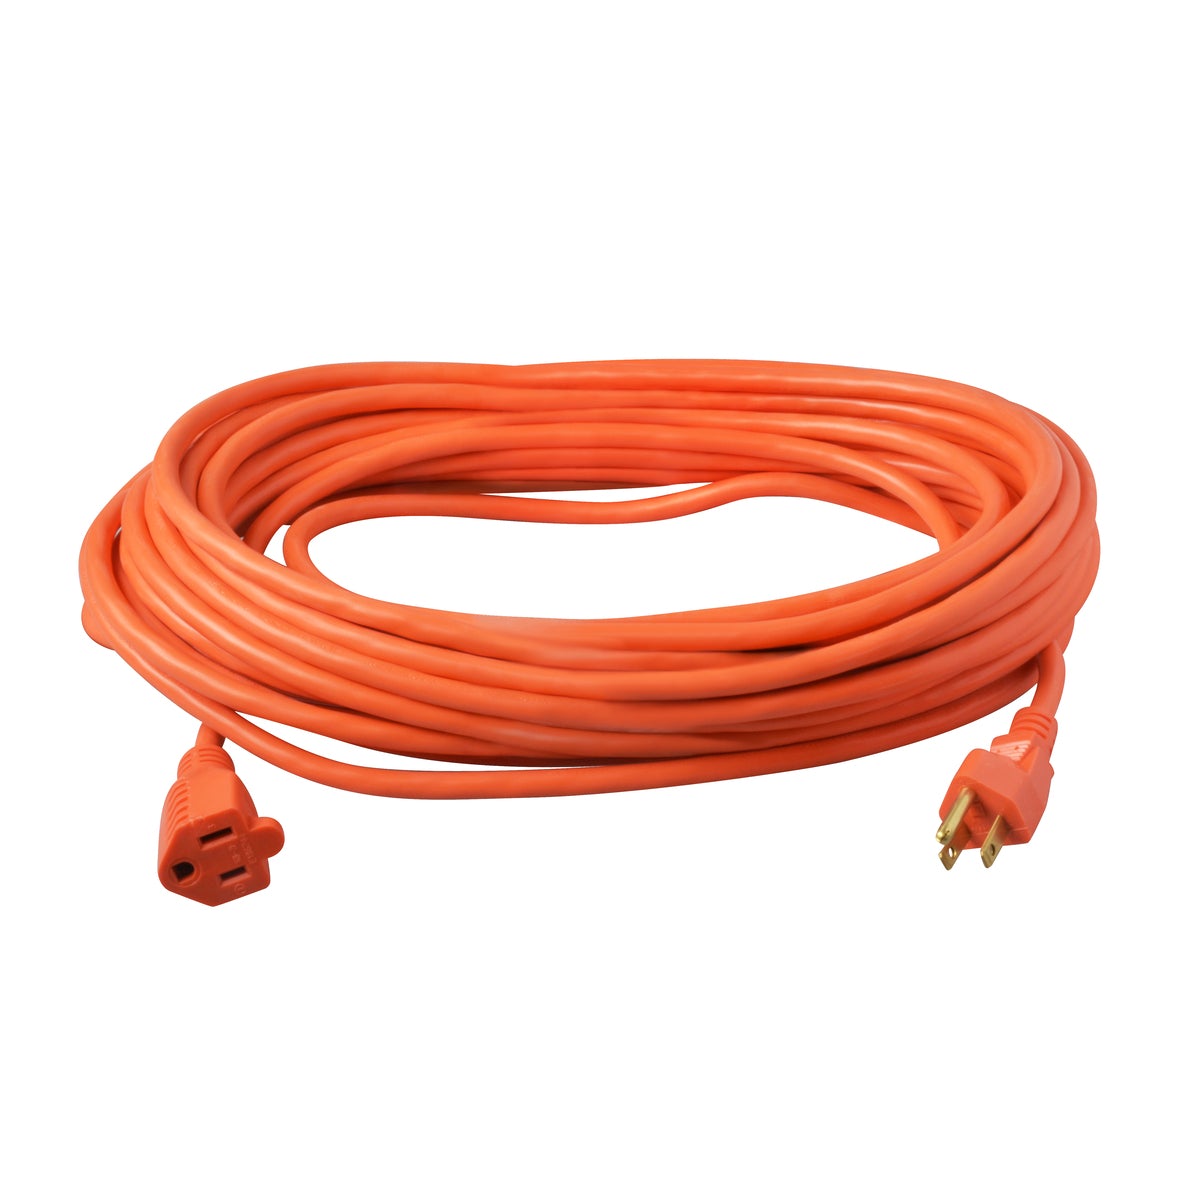 Southwire Company, Southwire Company 16/3 Medium-Duty 13-Amp SJTW General Purpose Extension Cord, 50-Feet